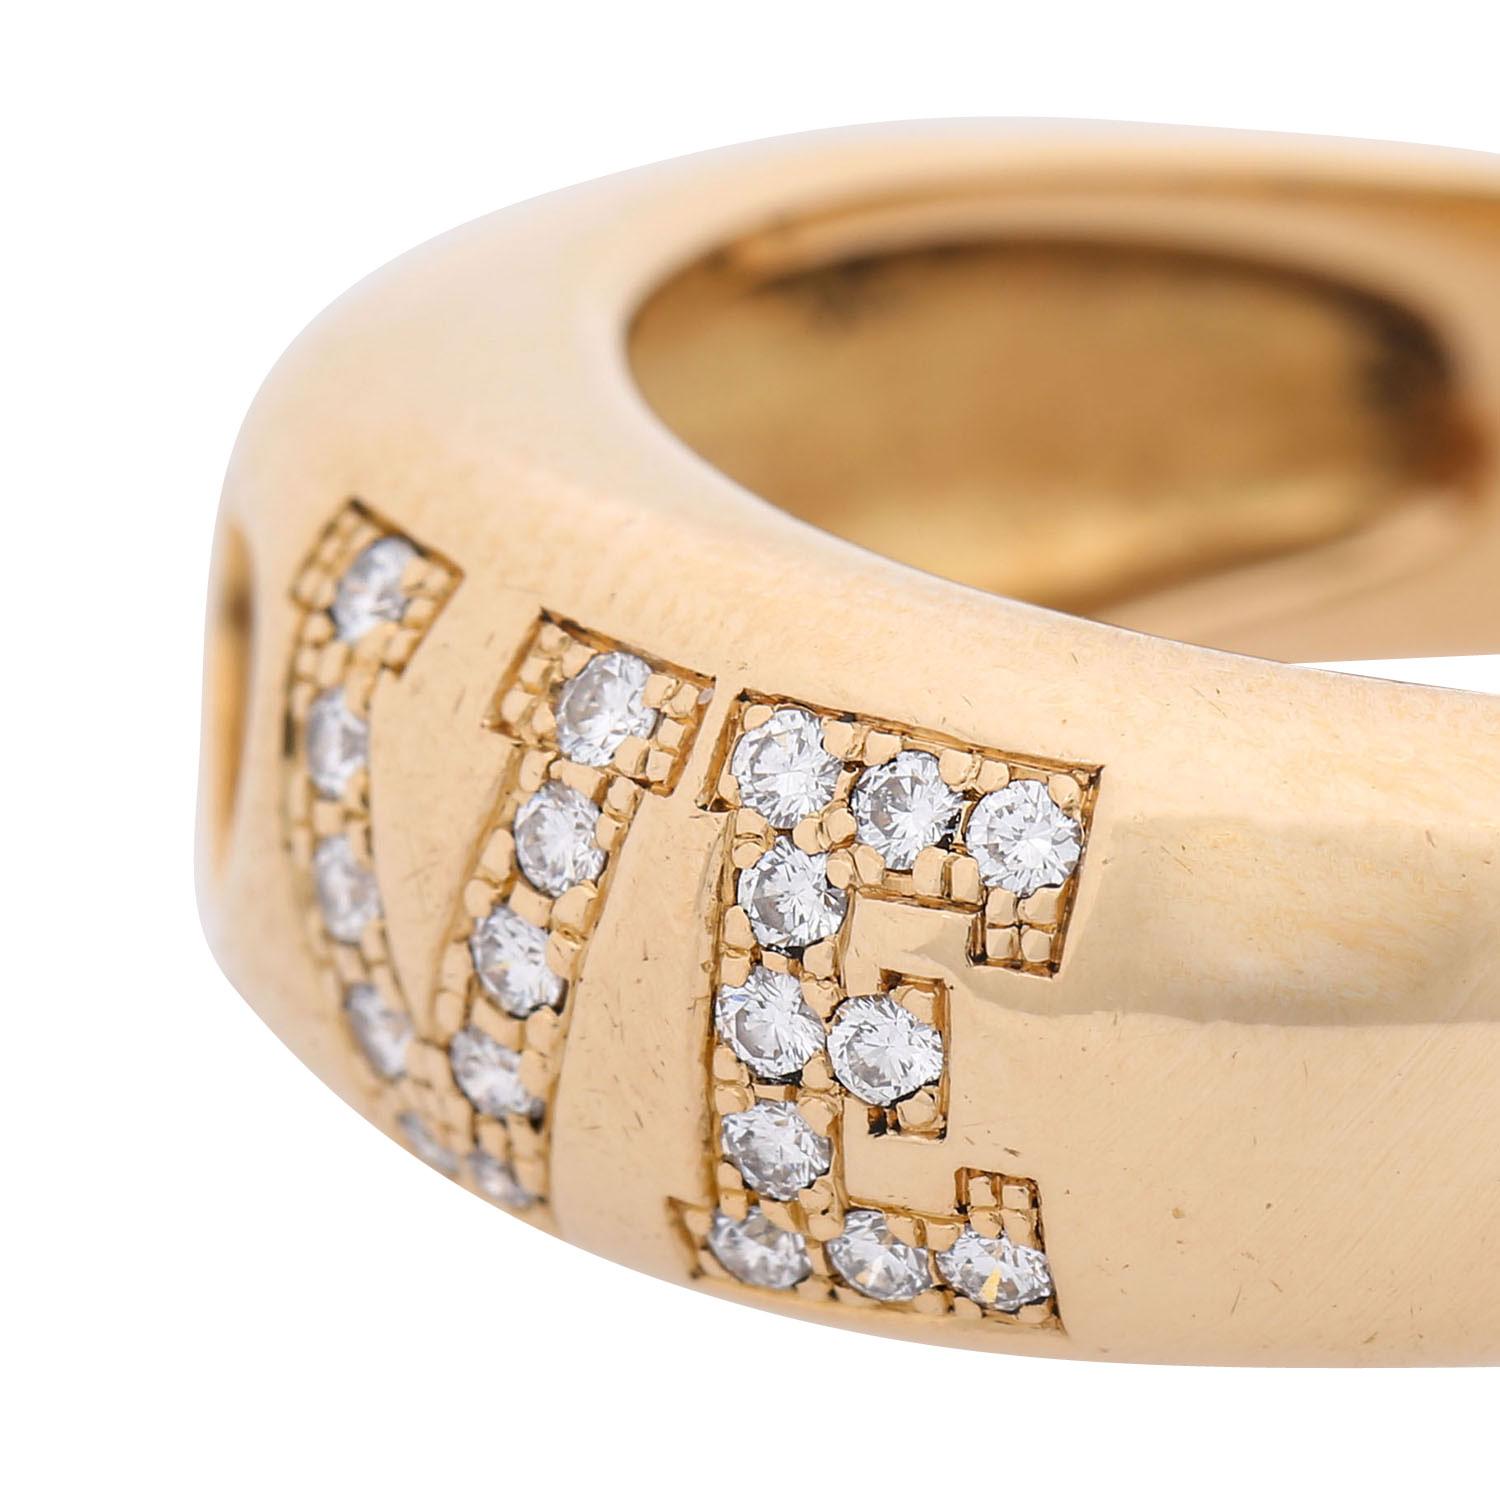 Brilliant Cut Chopard Ring 'LOVE' with Brilliant-Cut Diamonds Total Approximately 0.3 Carat For Sale